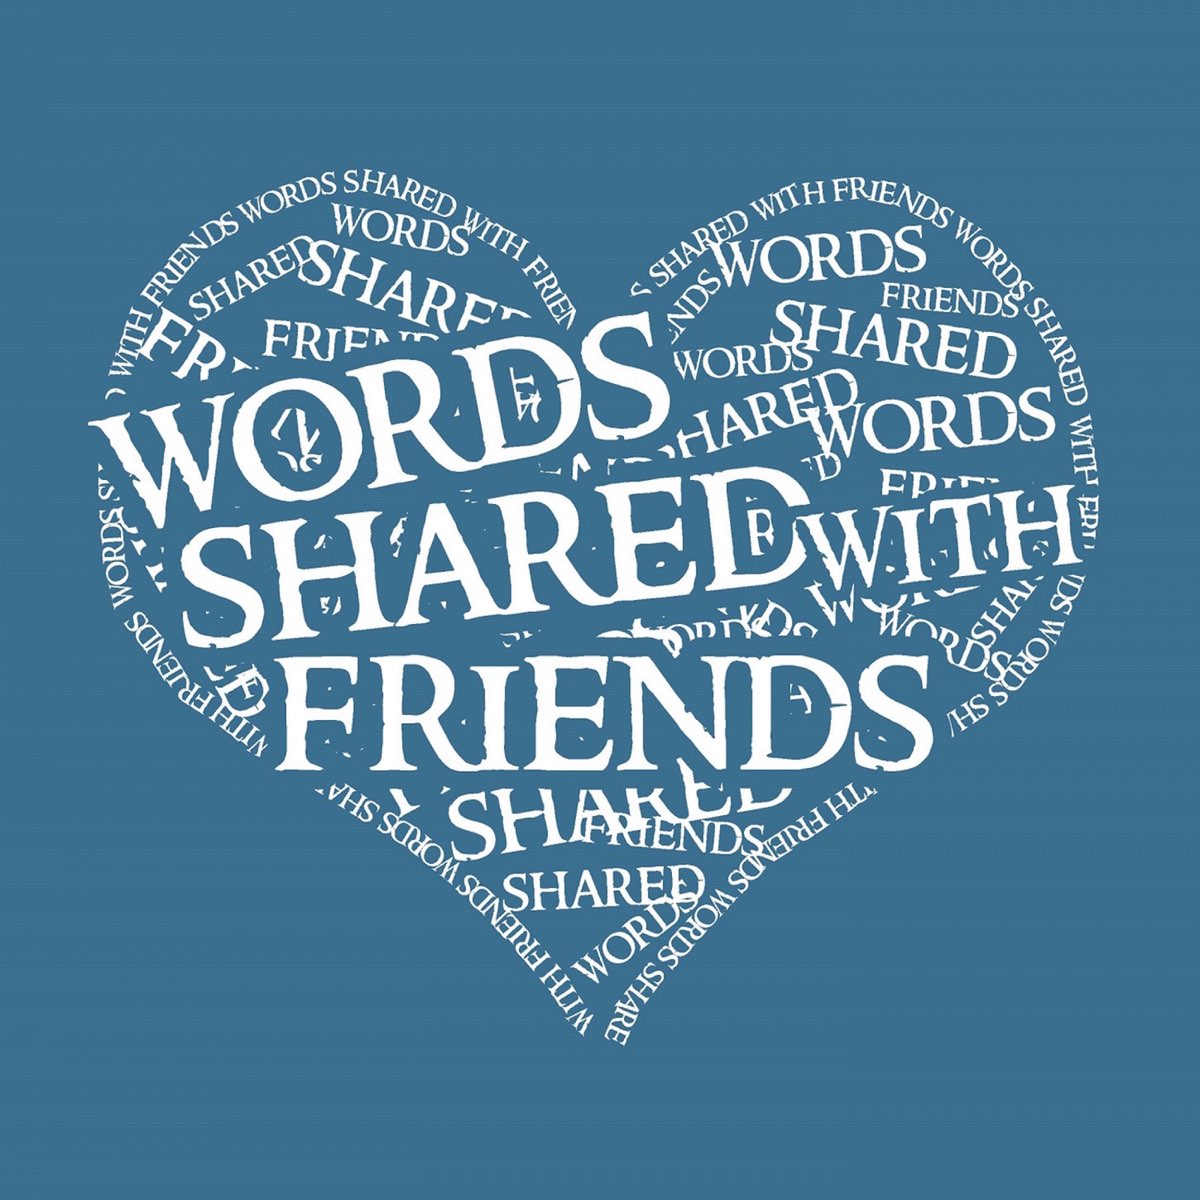 Friendship Word. Shares Words. Shared Words. Friendship with Words. My best friend words